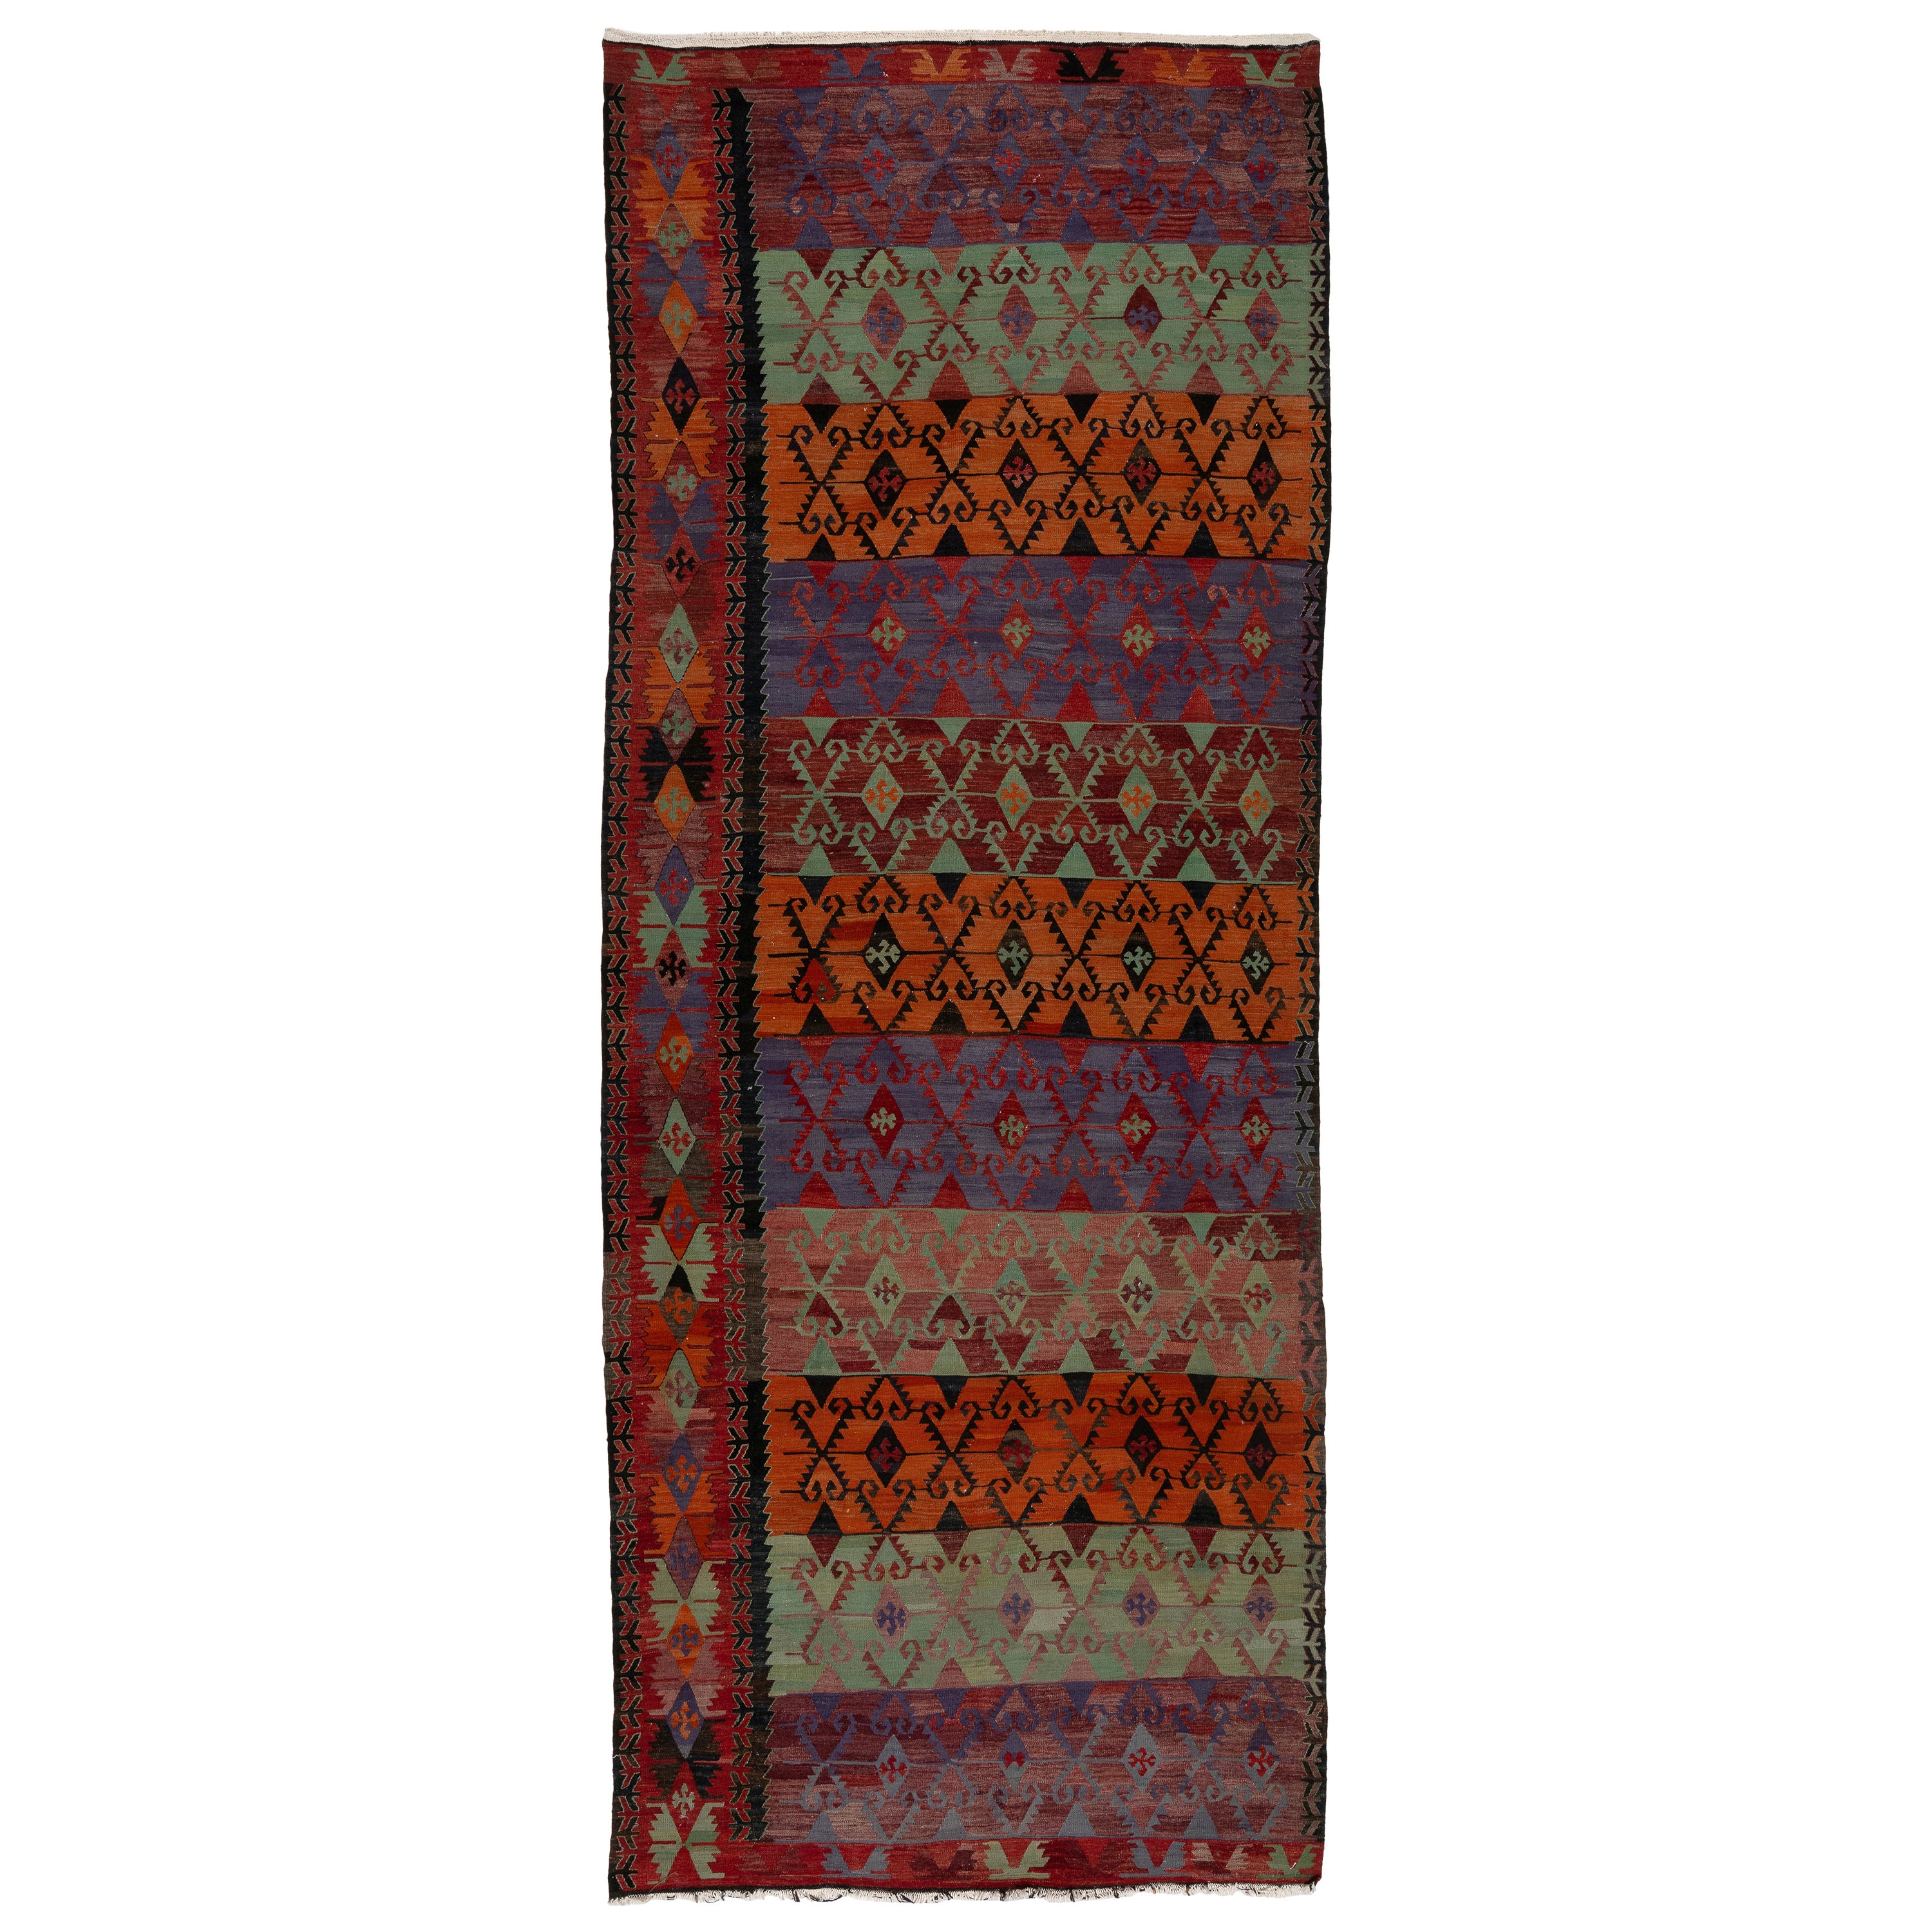 5.2x13.2 Ft Rare Vintage Anatolian Kilim, FlatWoven Floor Covering, Colorful Rug For Sale